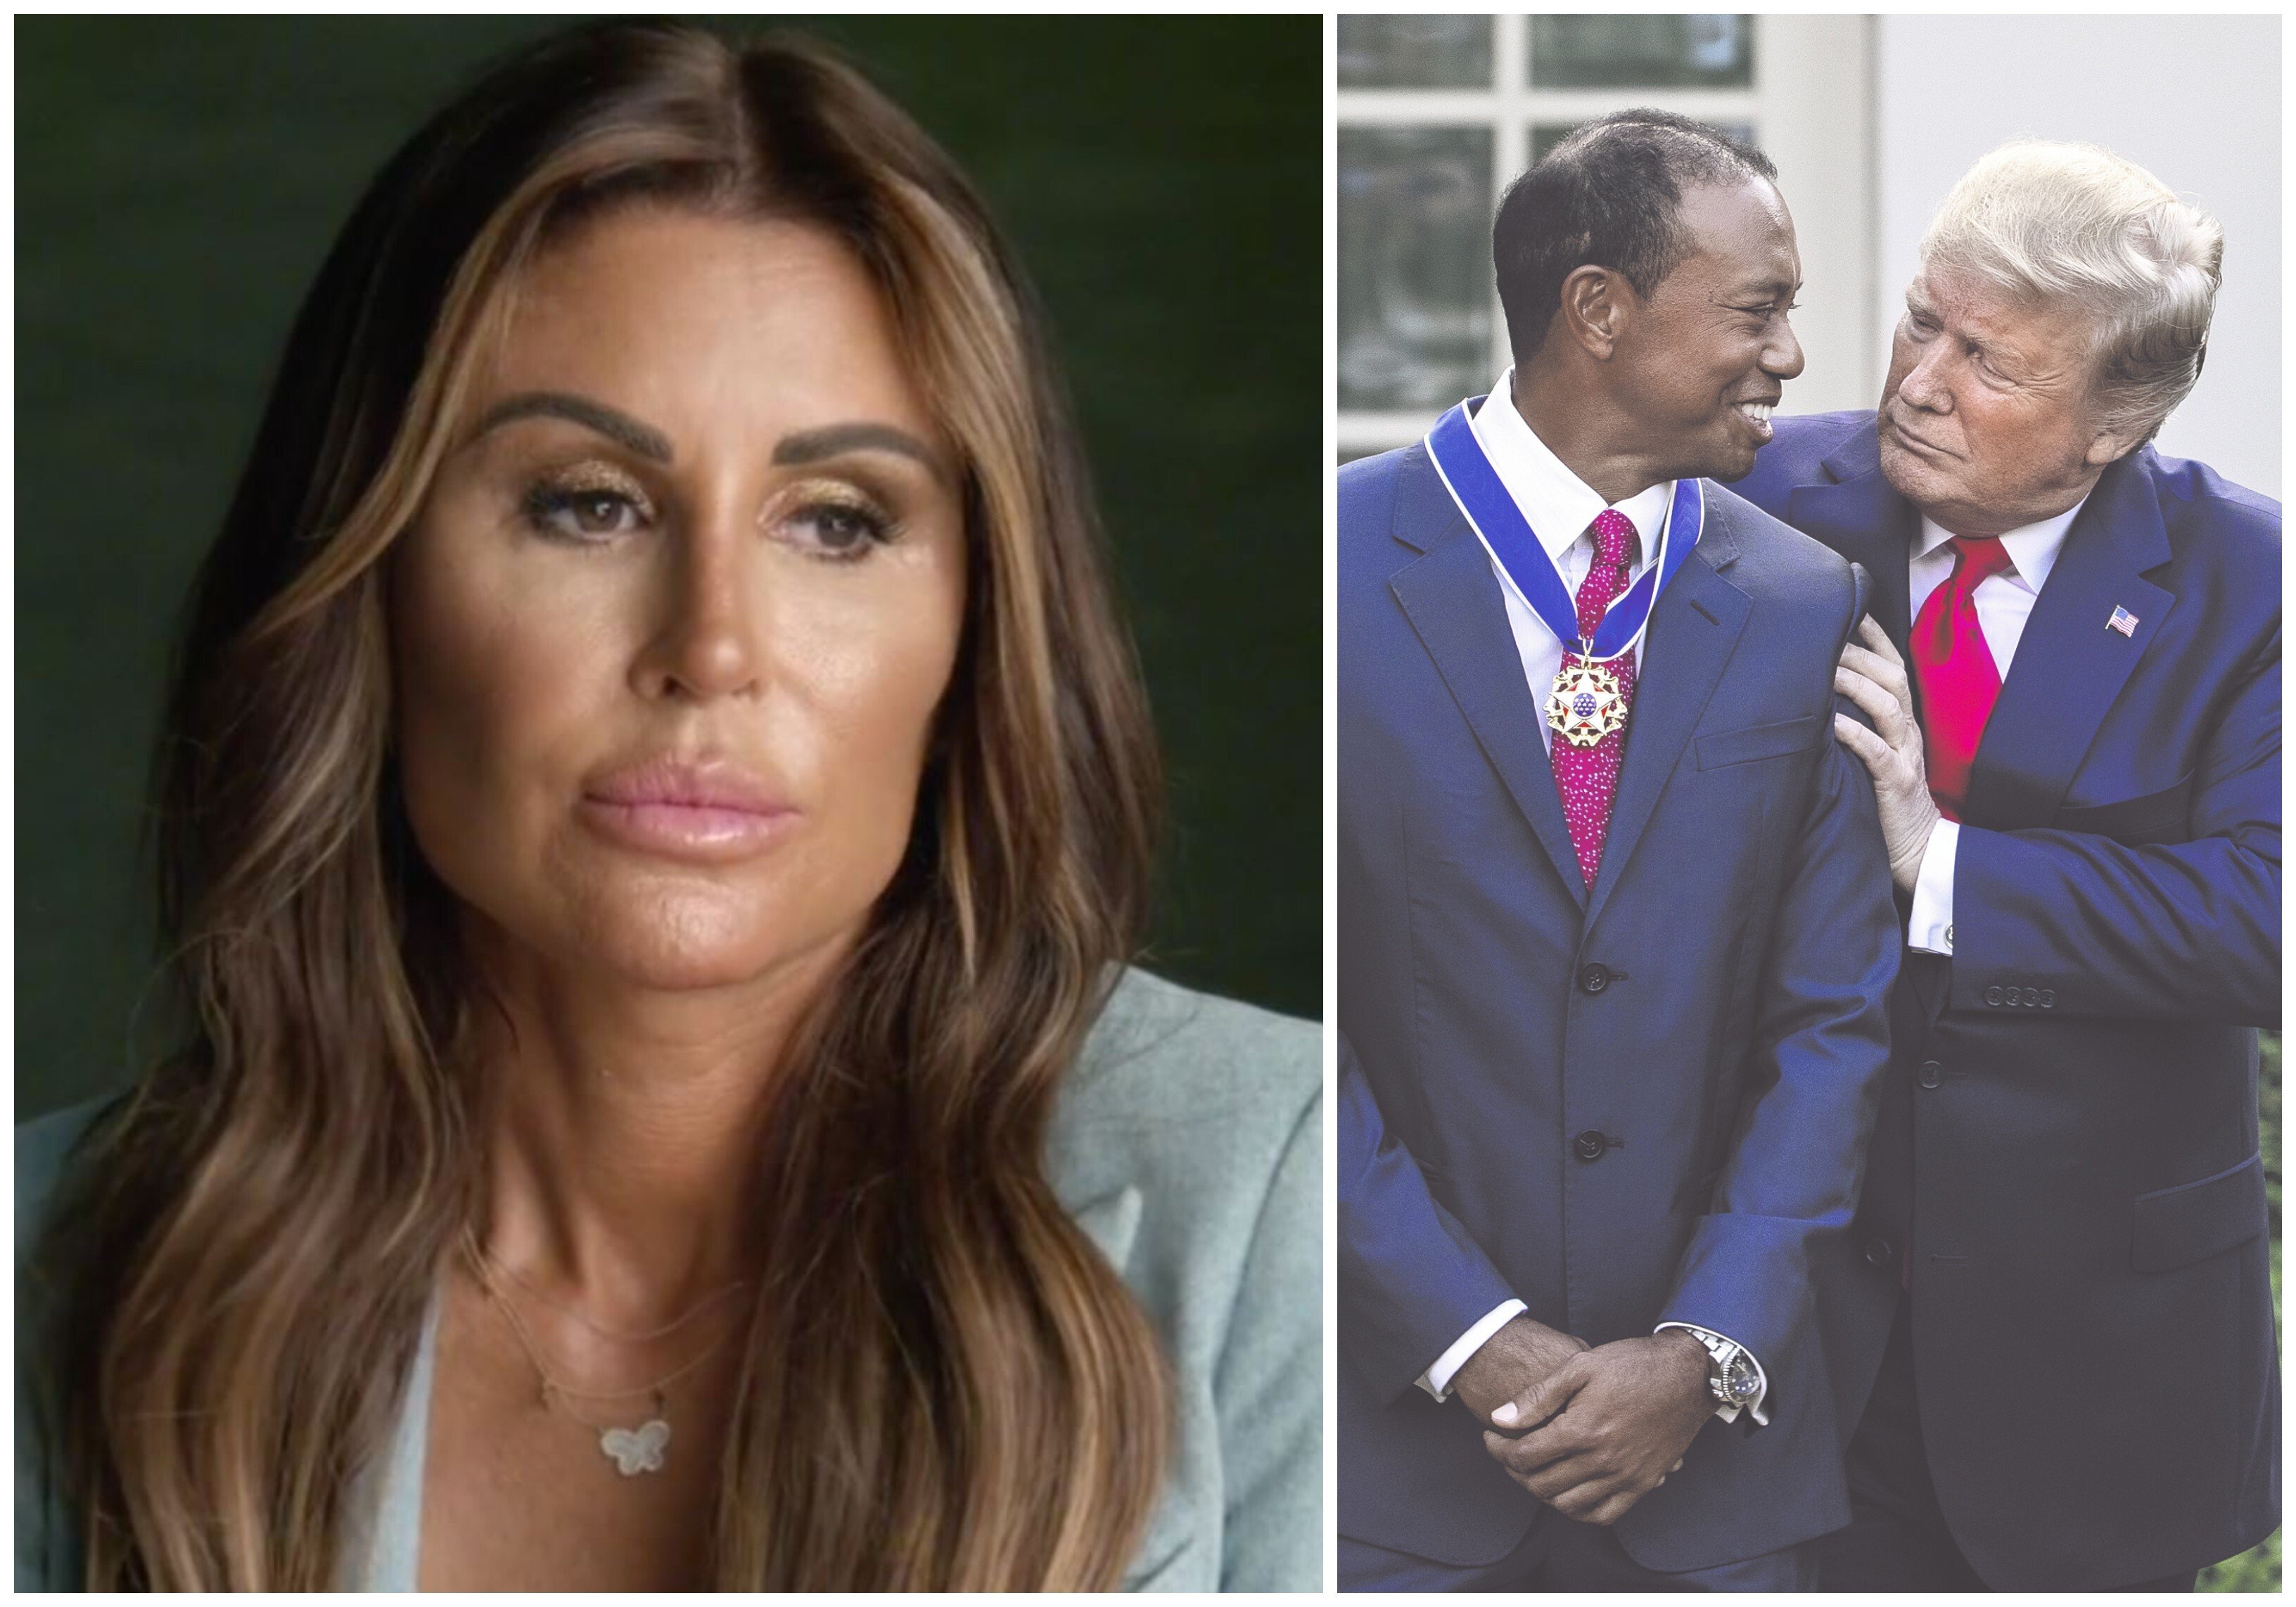 Rachel Uchitel, best known for her relationship with famous US golfer Tiger Woods, hoped to reveal more about herself and her story in HBO’s new docuseries, Tiger. Photos: Bloomberg/HBO